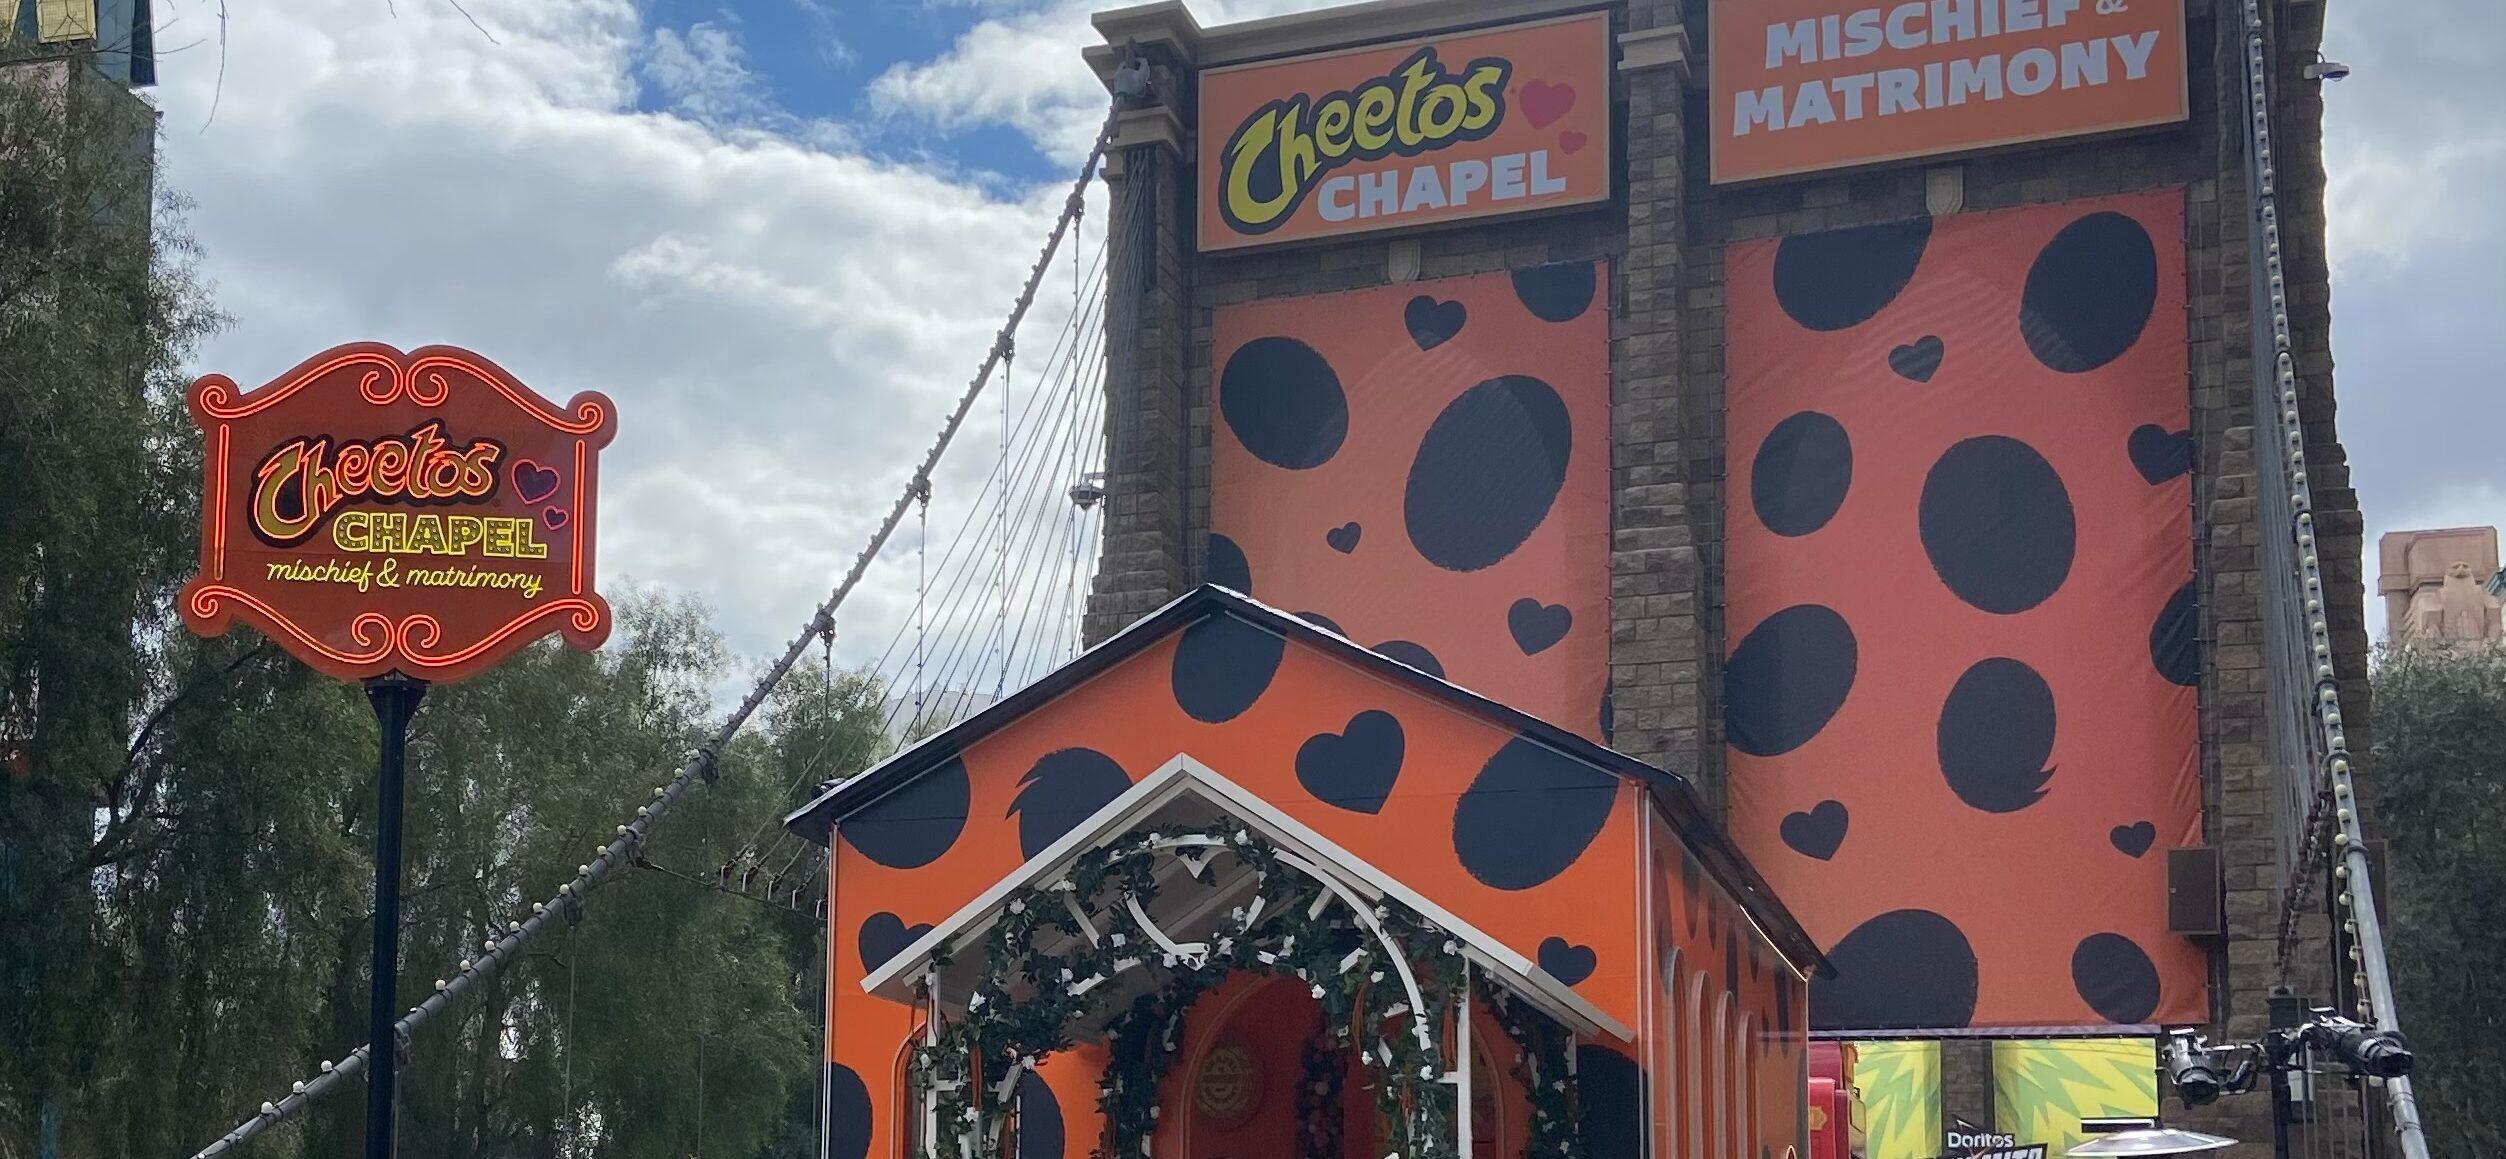 Flamin’ Hot Vows: Say ‘I Do’ In A Cheesy Way At The Cheetos Chapel In Vegas!